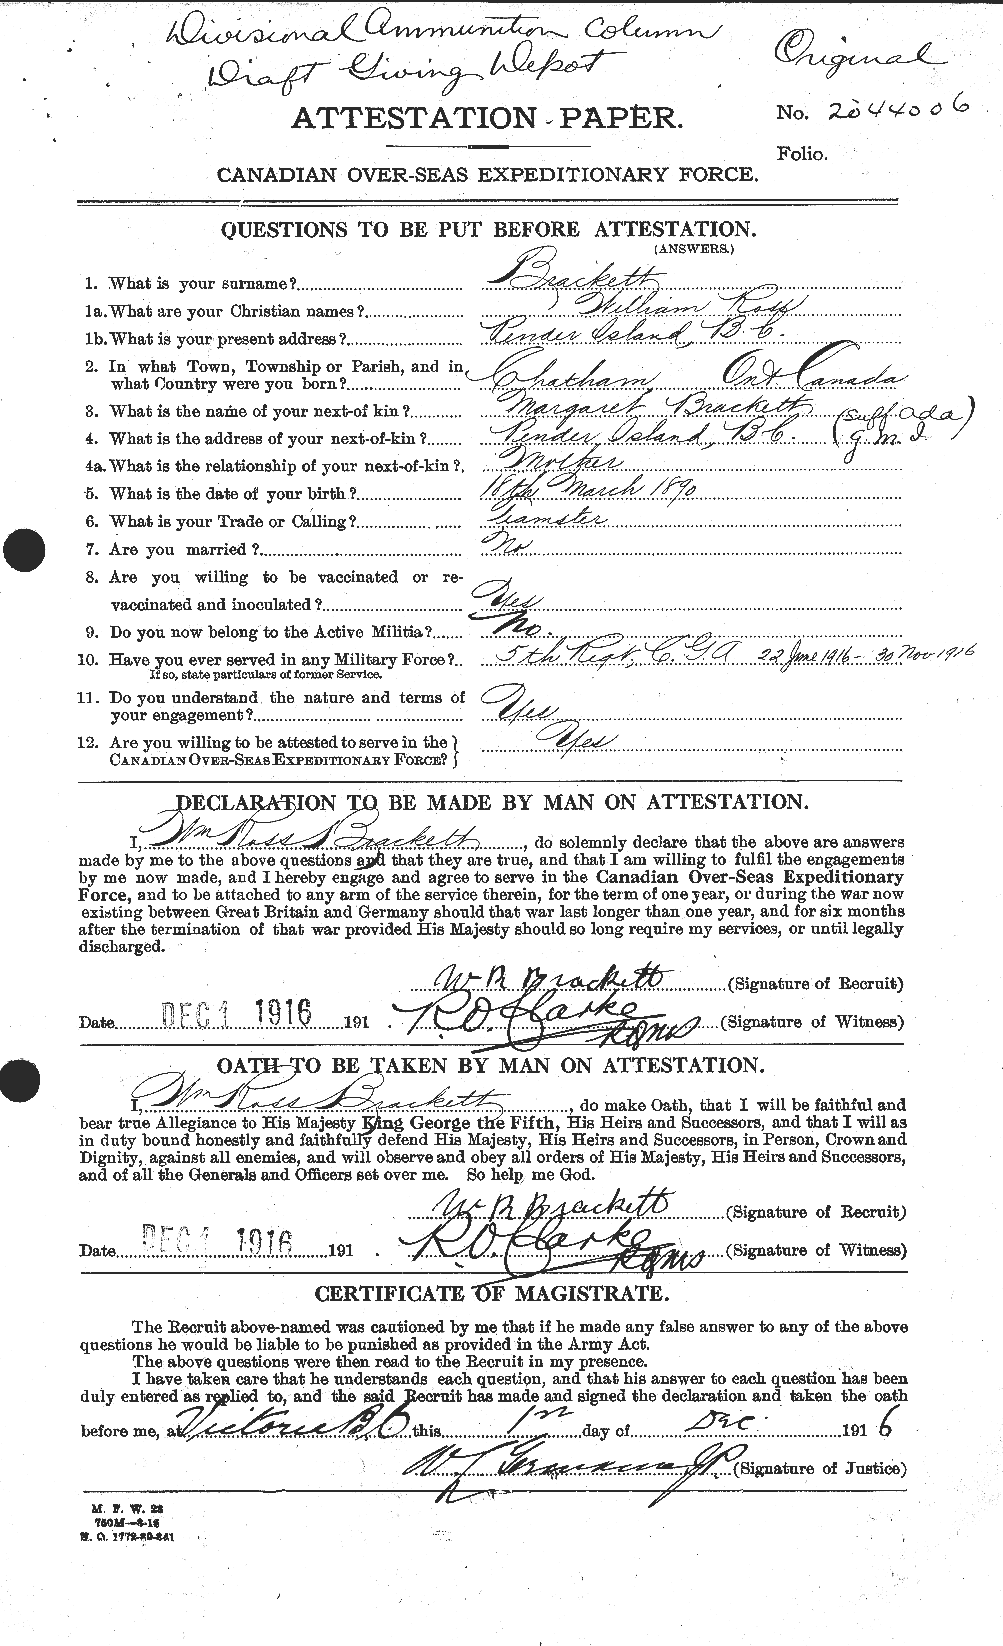 Personnel Records of the First World War - CEF 254744a